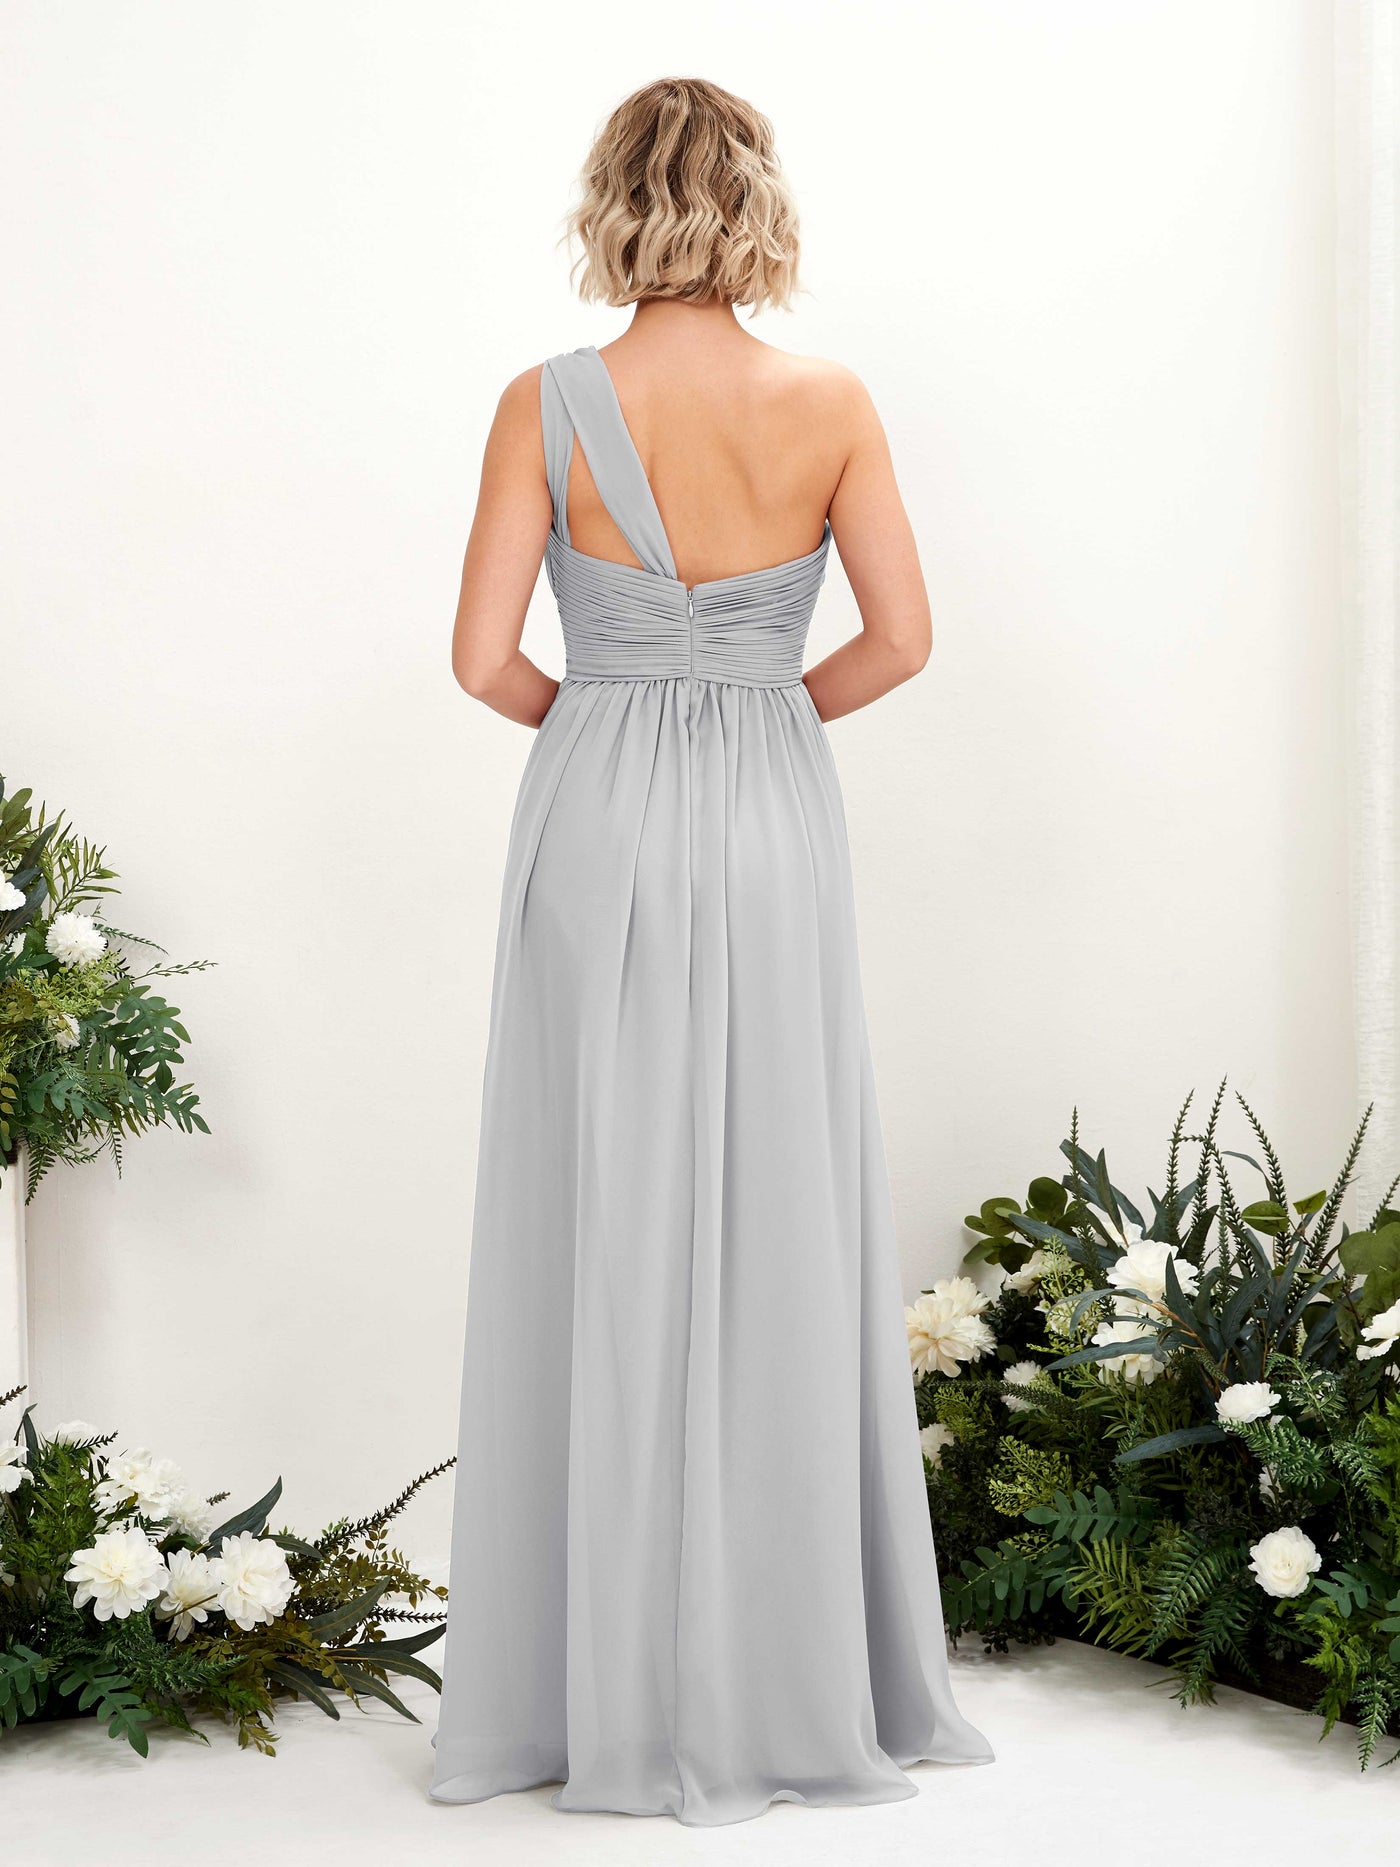 Silver Bridesmaid Dresses Bridesmaid Dress Ball Gown Chiffon One Shoulder Full Length Sleeveless Wedding Party Dress (81225027)#color_silver